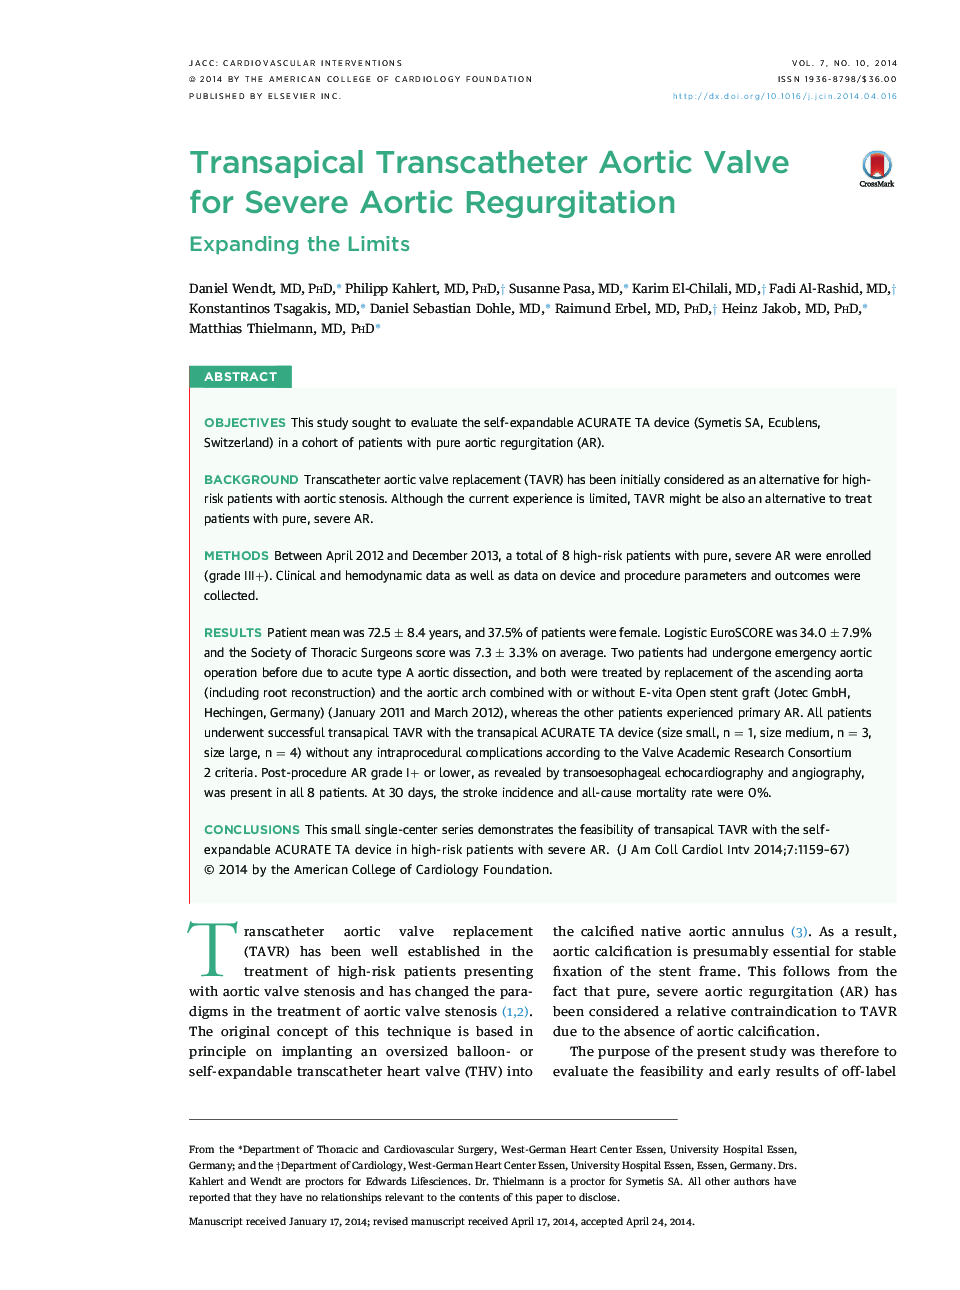 Transapical Transcatheter Aortic Valve for Severe Aortic Regurgitation : Expanding the Limits